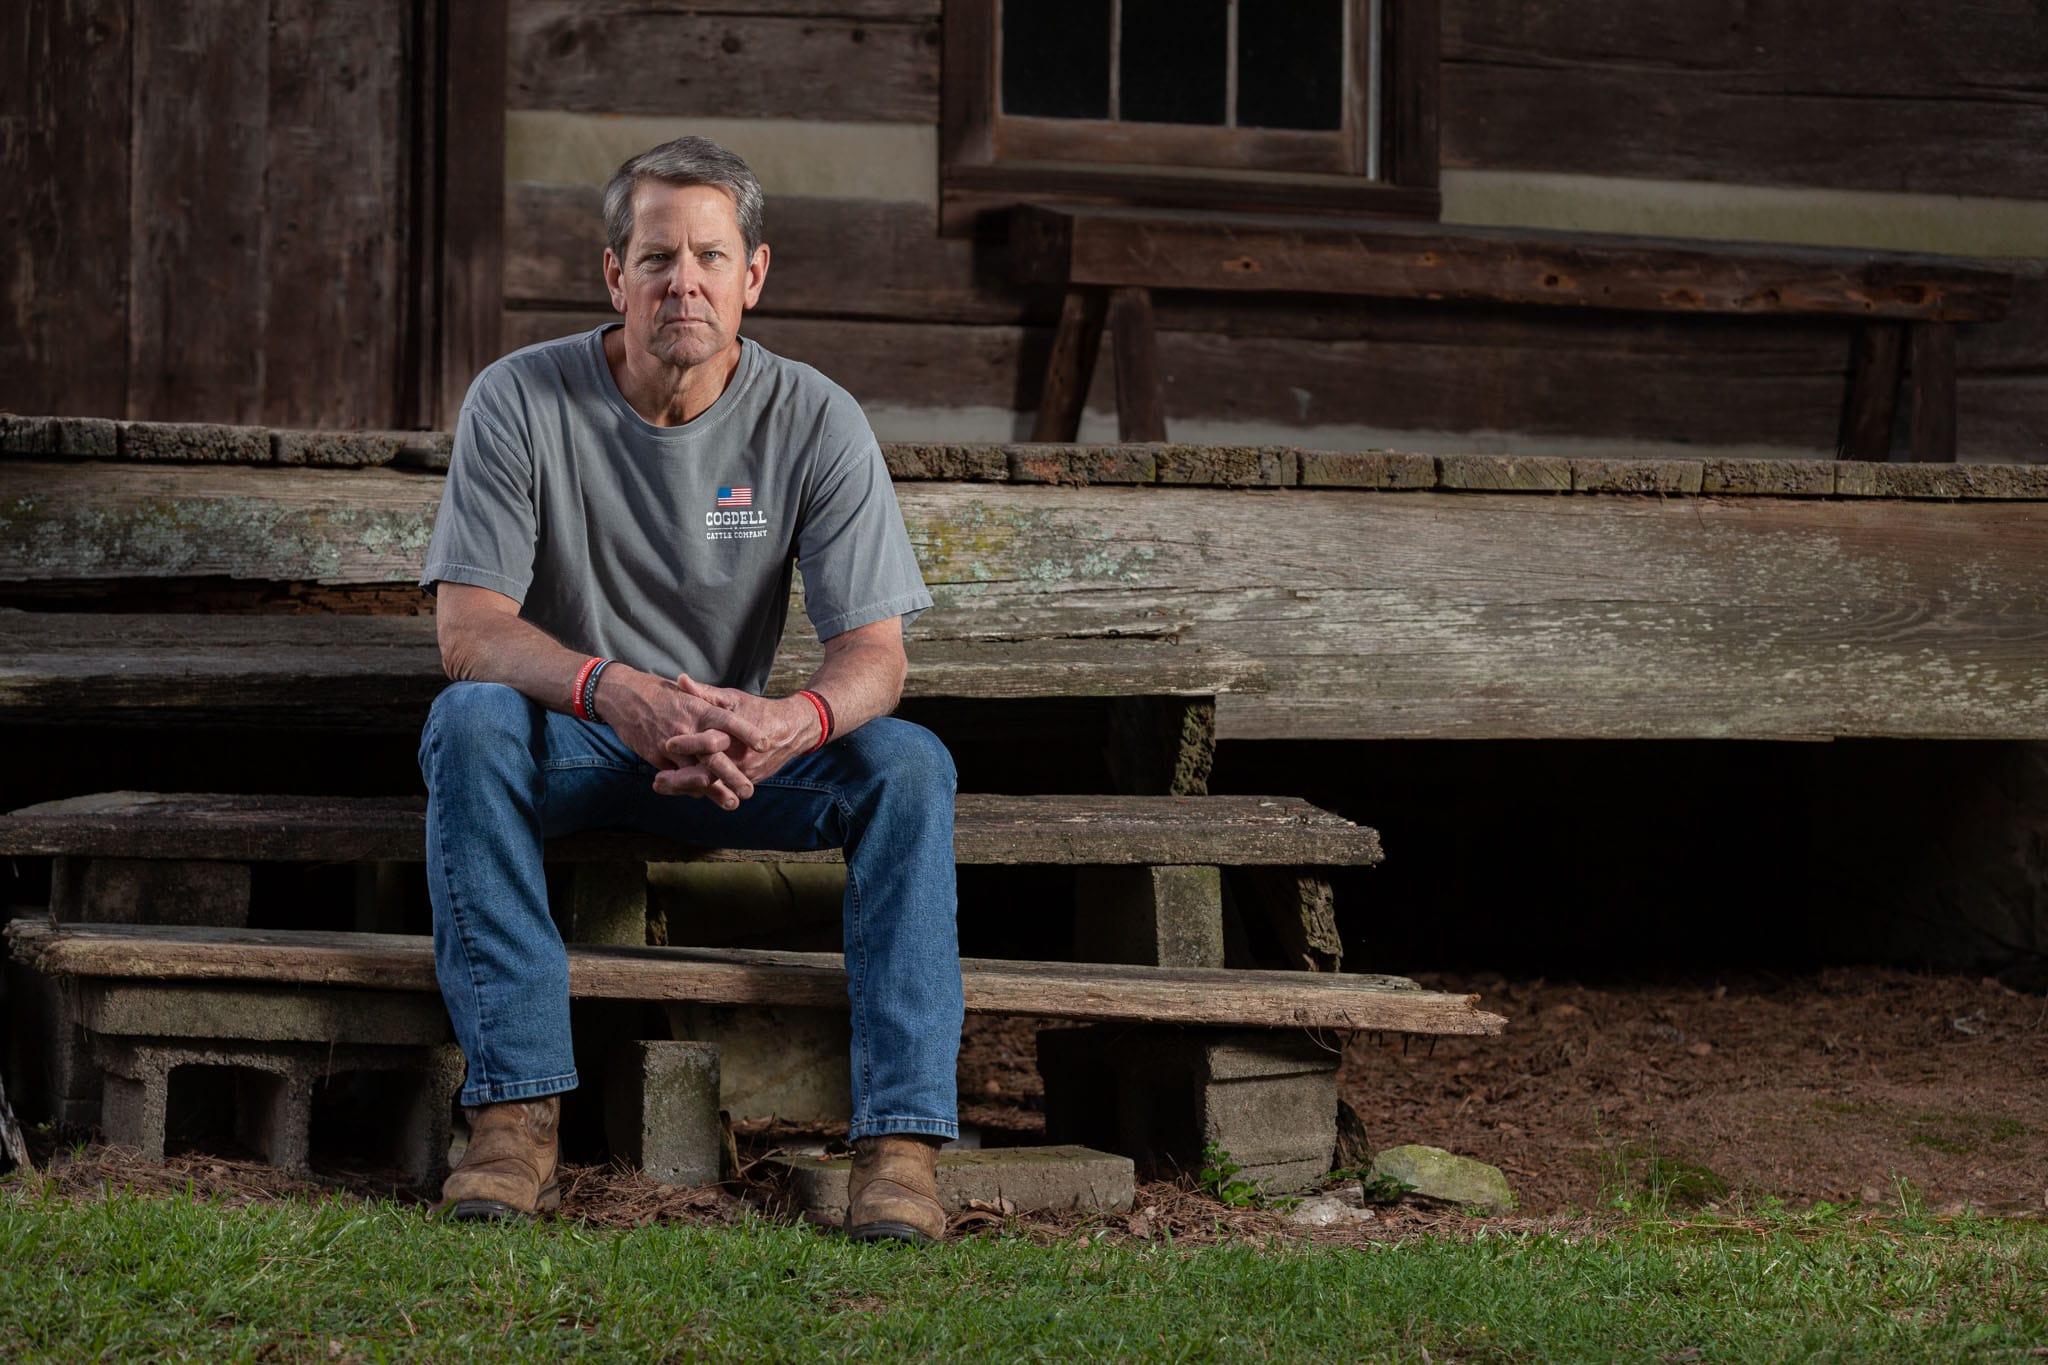 Georgia-Governor-Brian-Kemp-sitting-on-the-steps-of-his-family's-historical-cabin-in-Athens-Georgia.